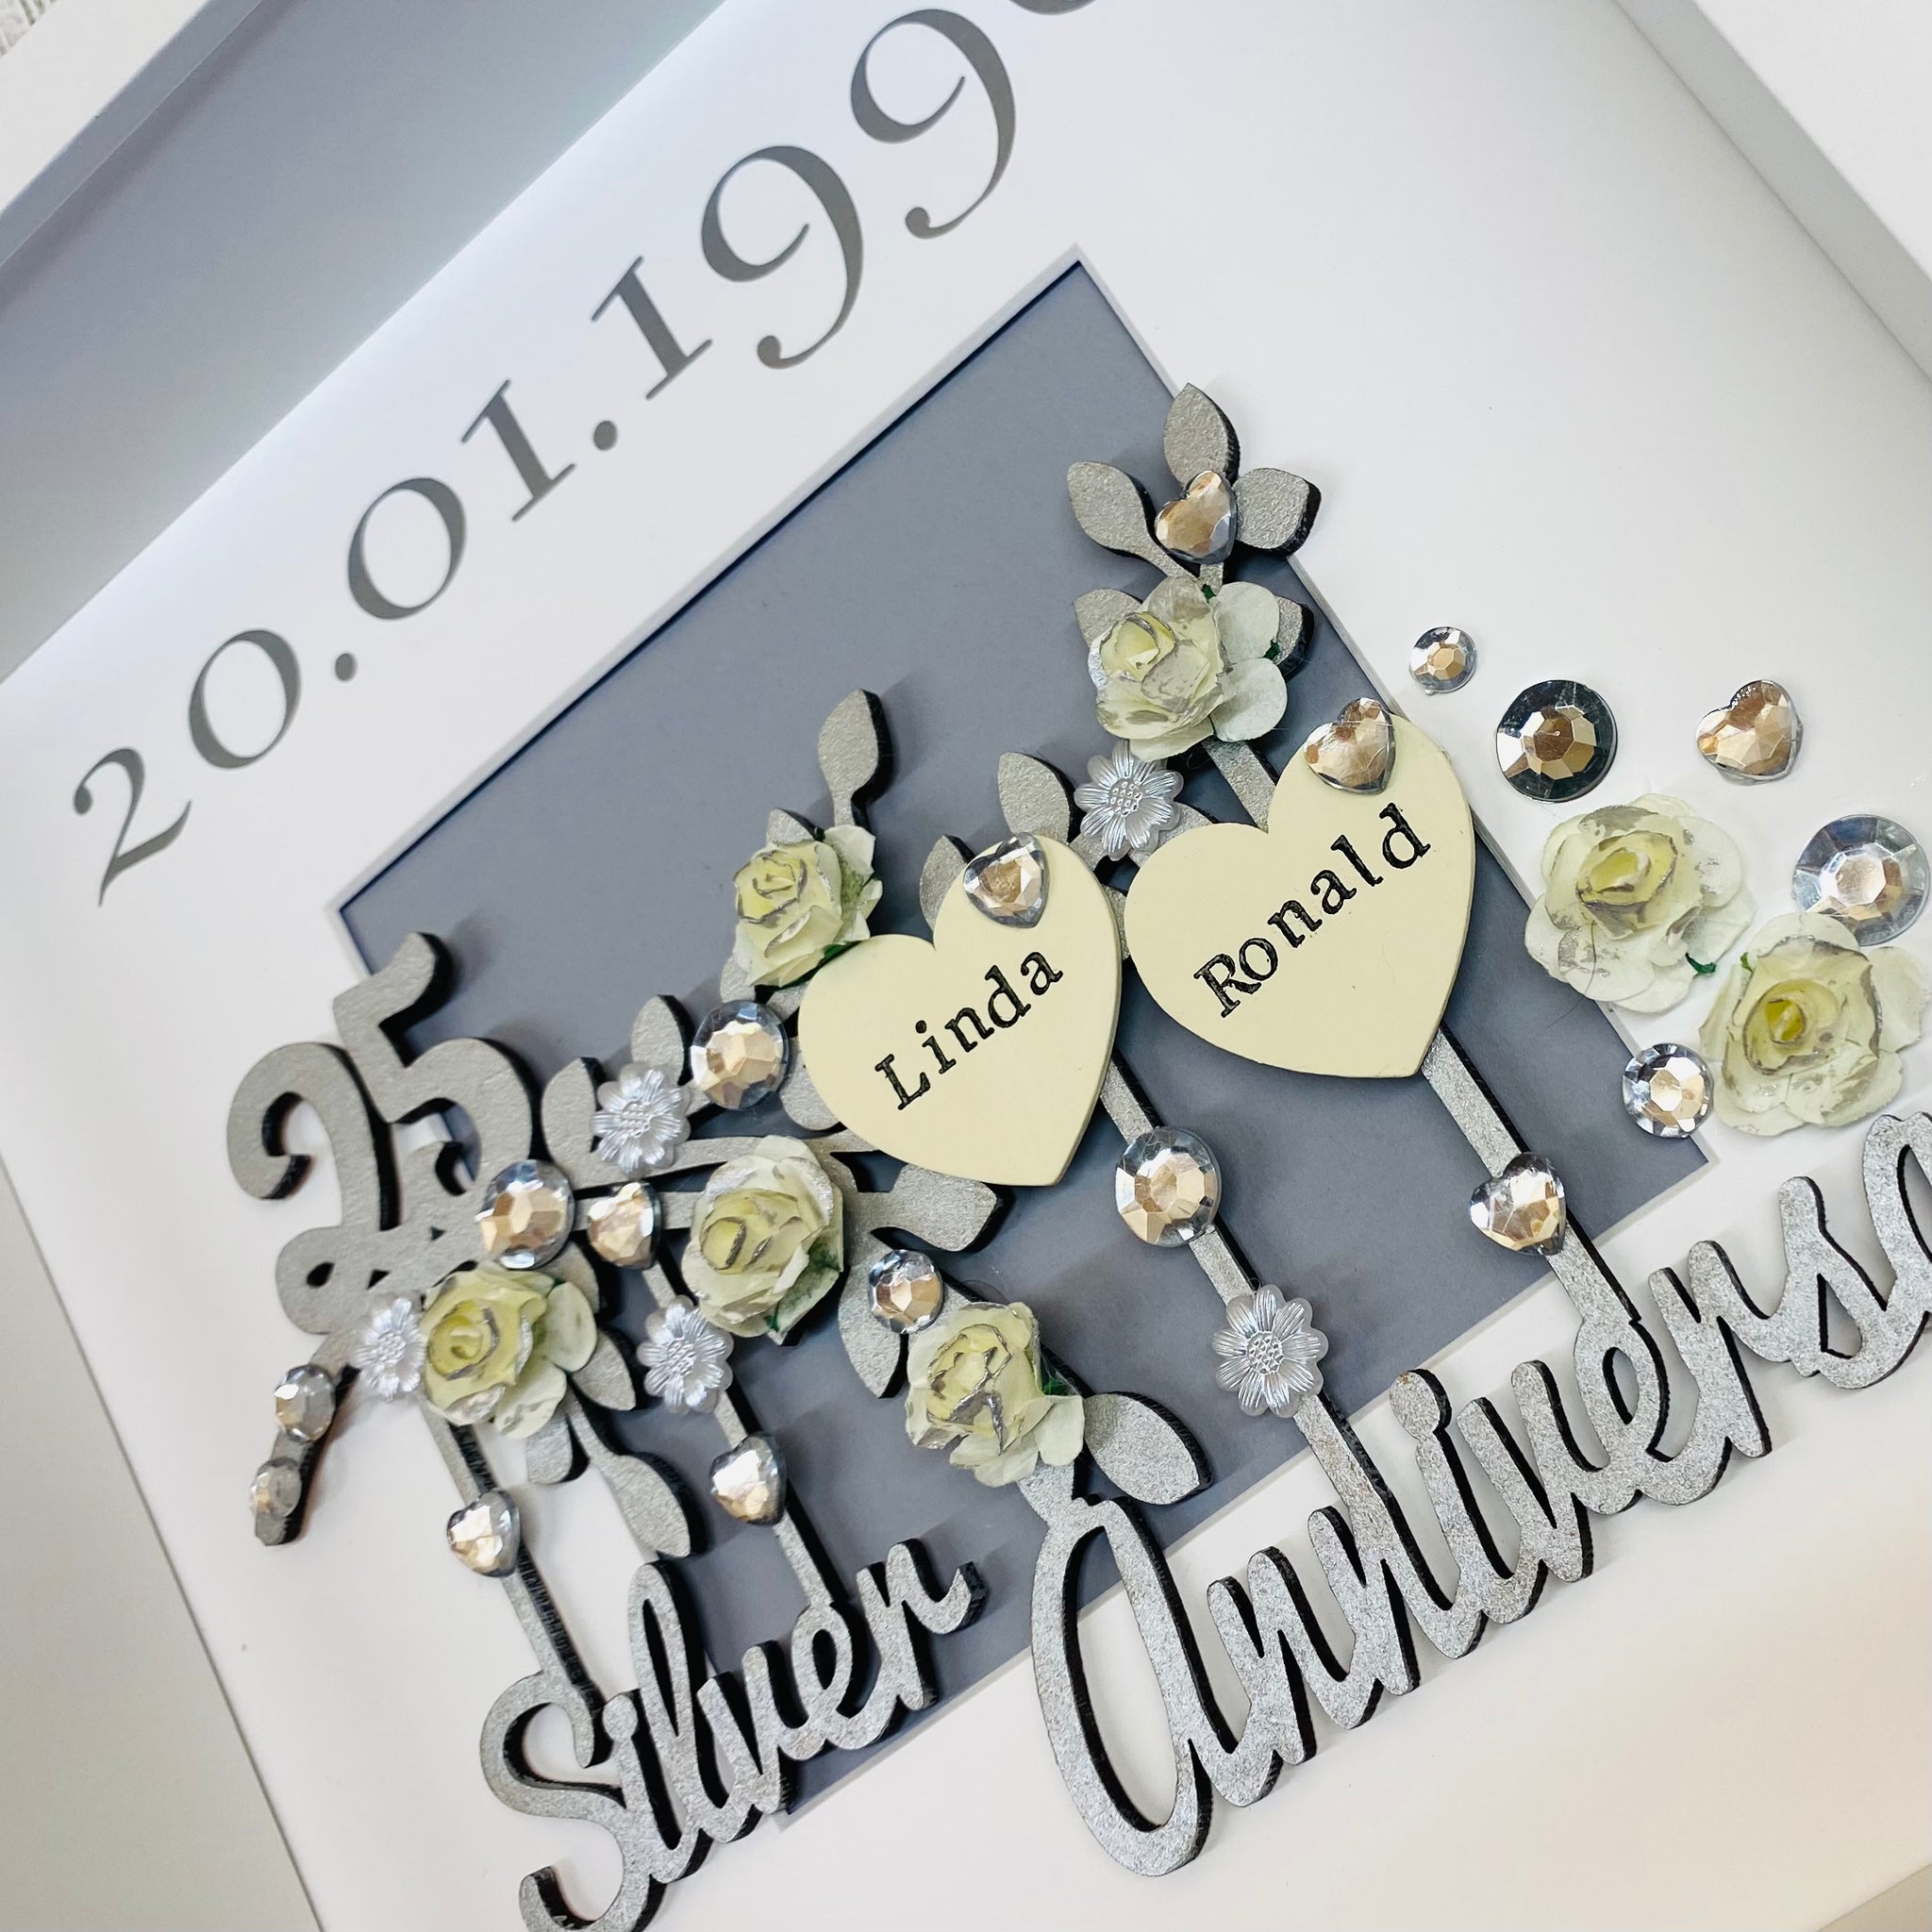 25th Wedding Anniversary Gifts for Couples, 25th Anniversary Gift for –  Crossroads Home Decor